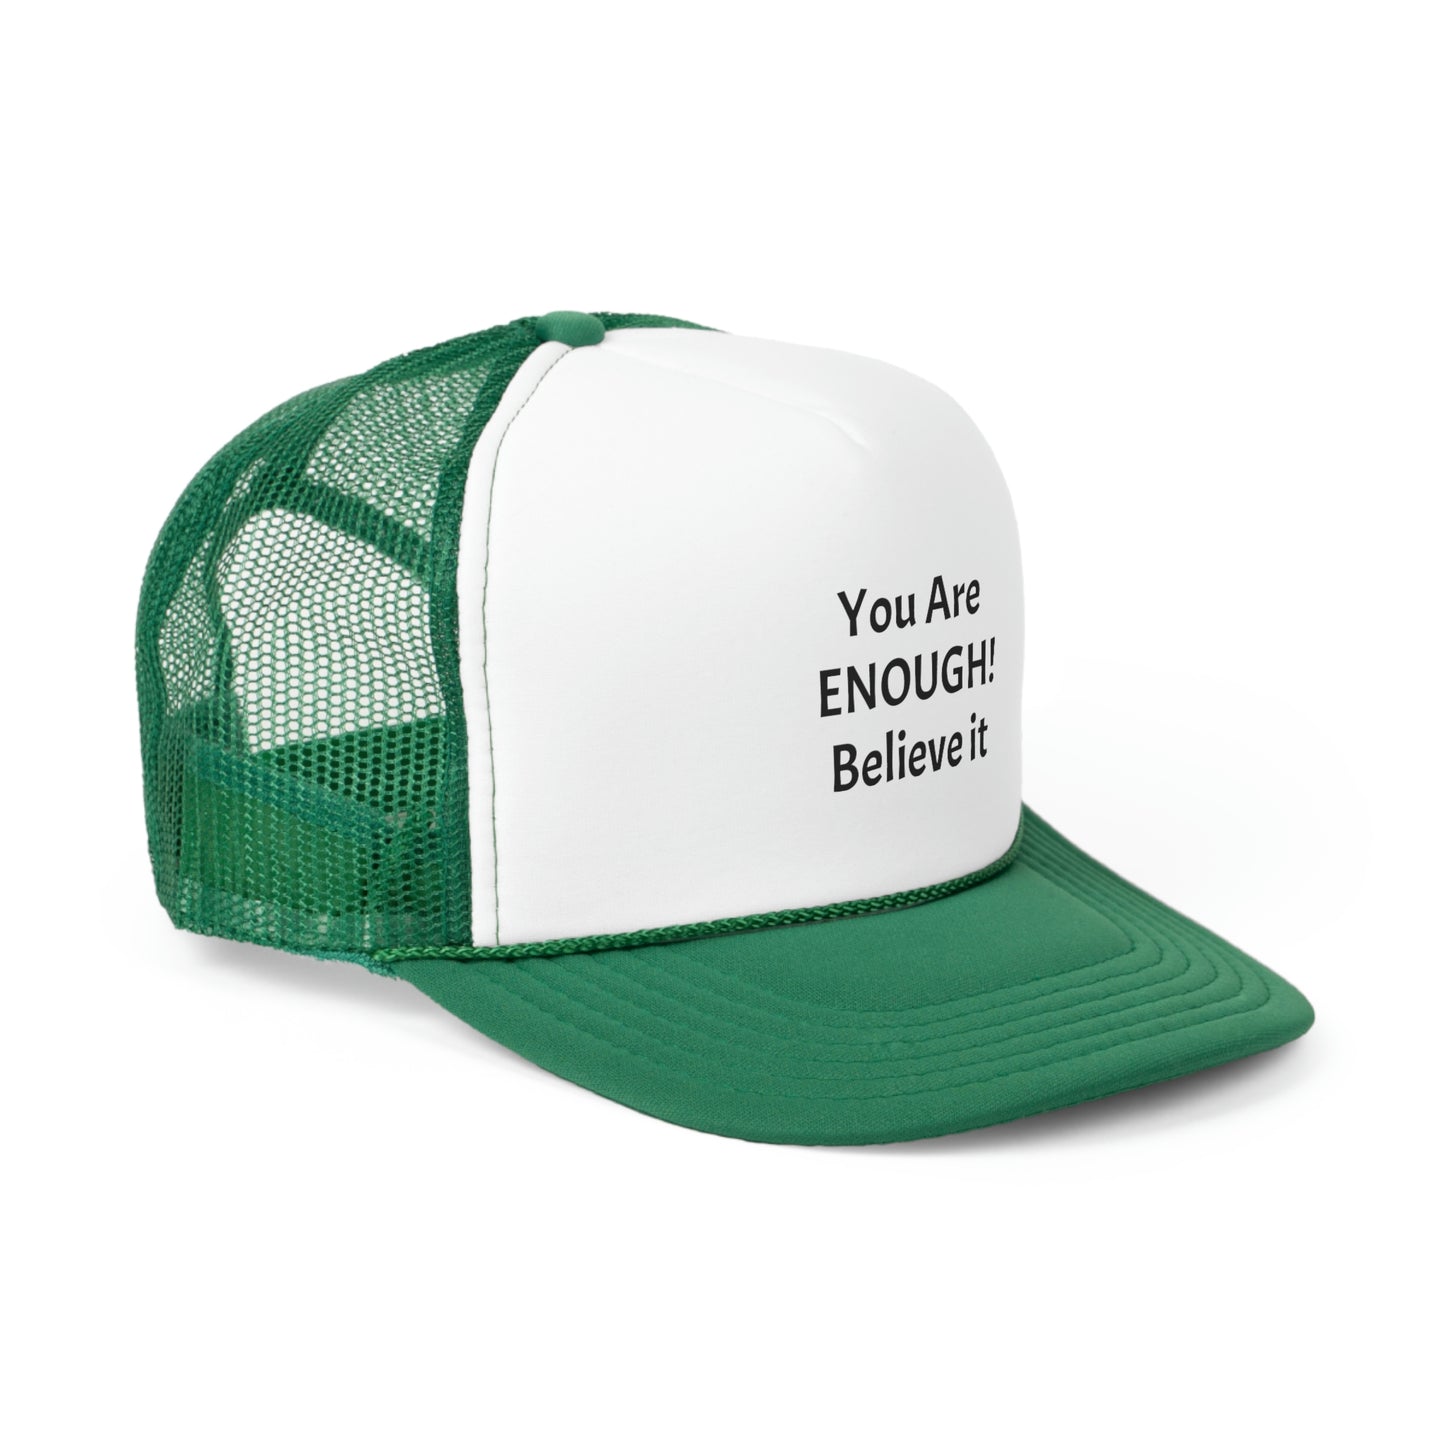 You Are Enough! Trucker Caps